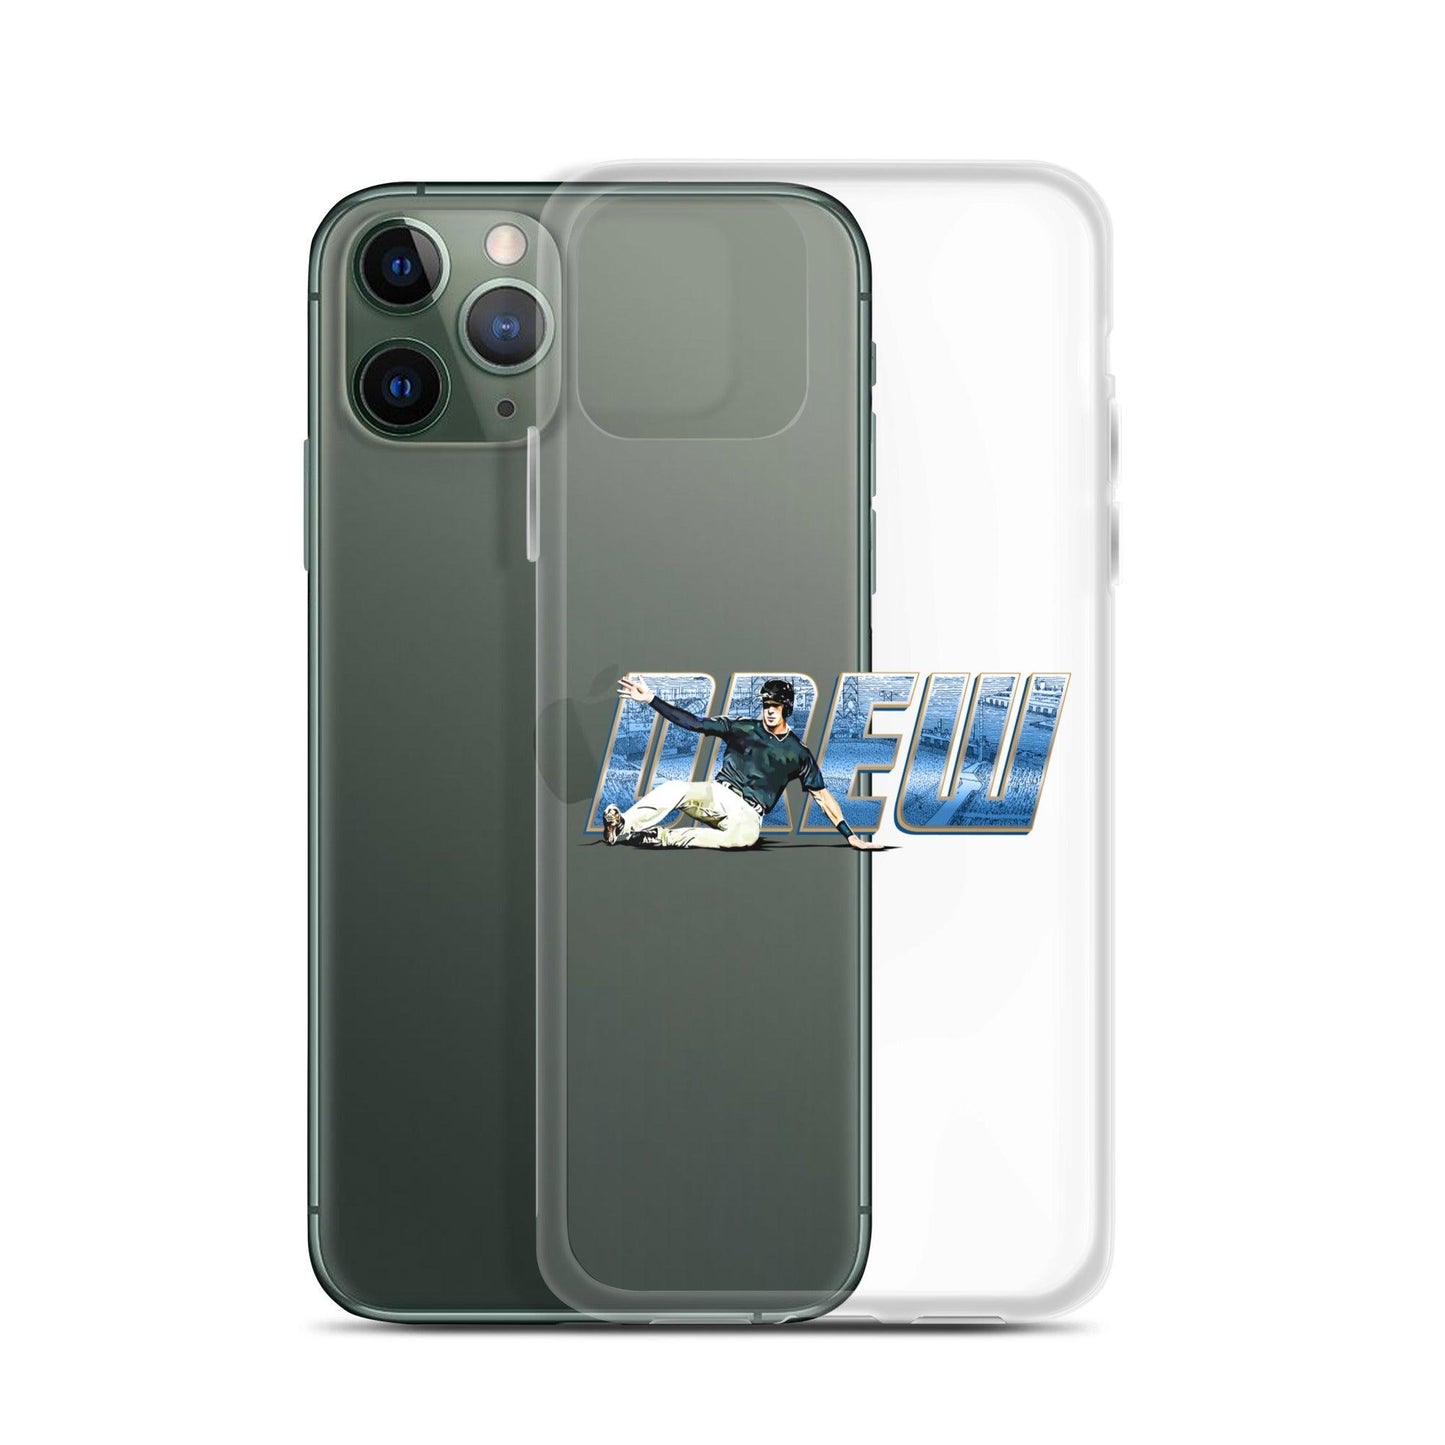 Drew Waters “Signature” iPhone Case - Fan Arch